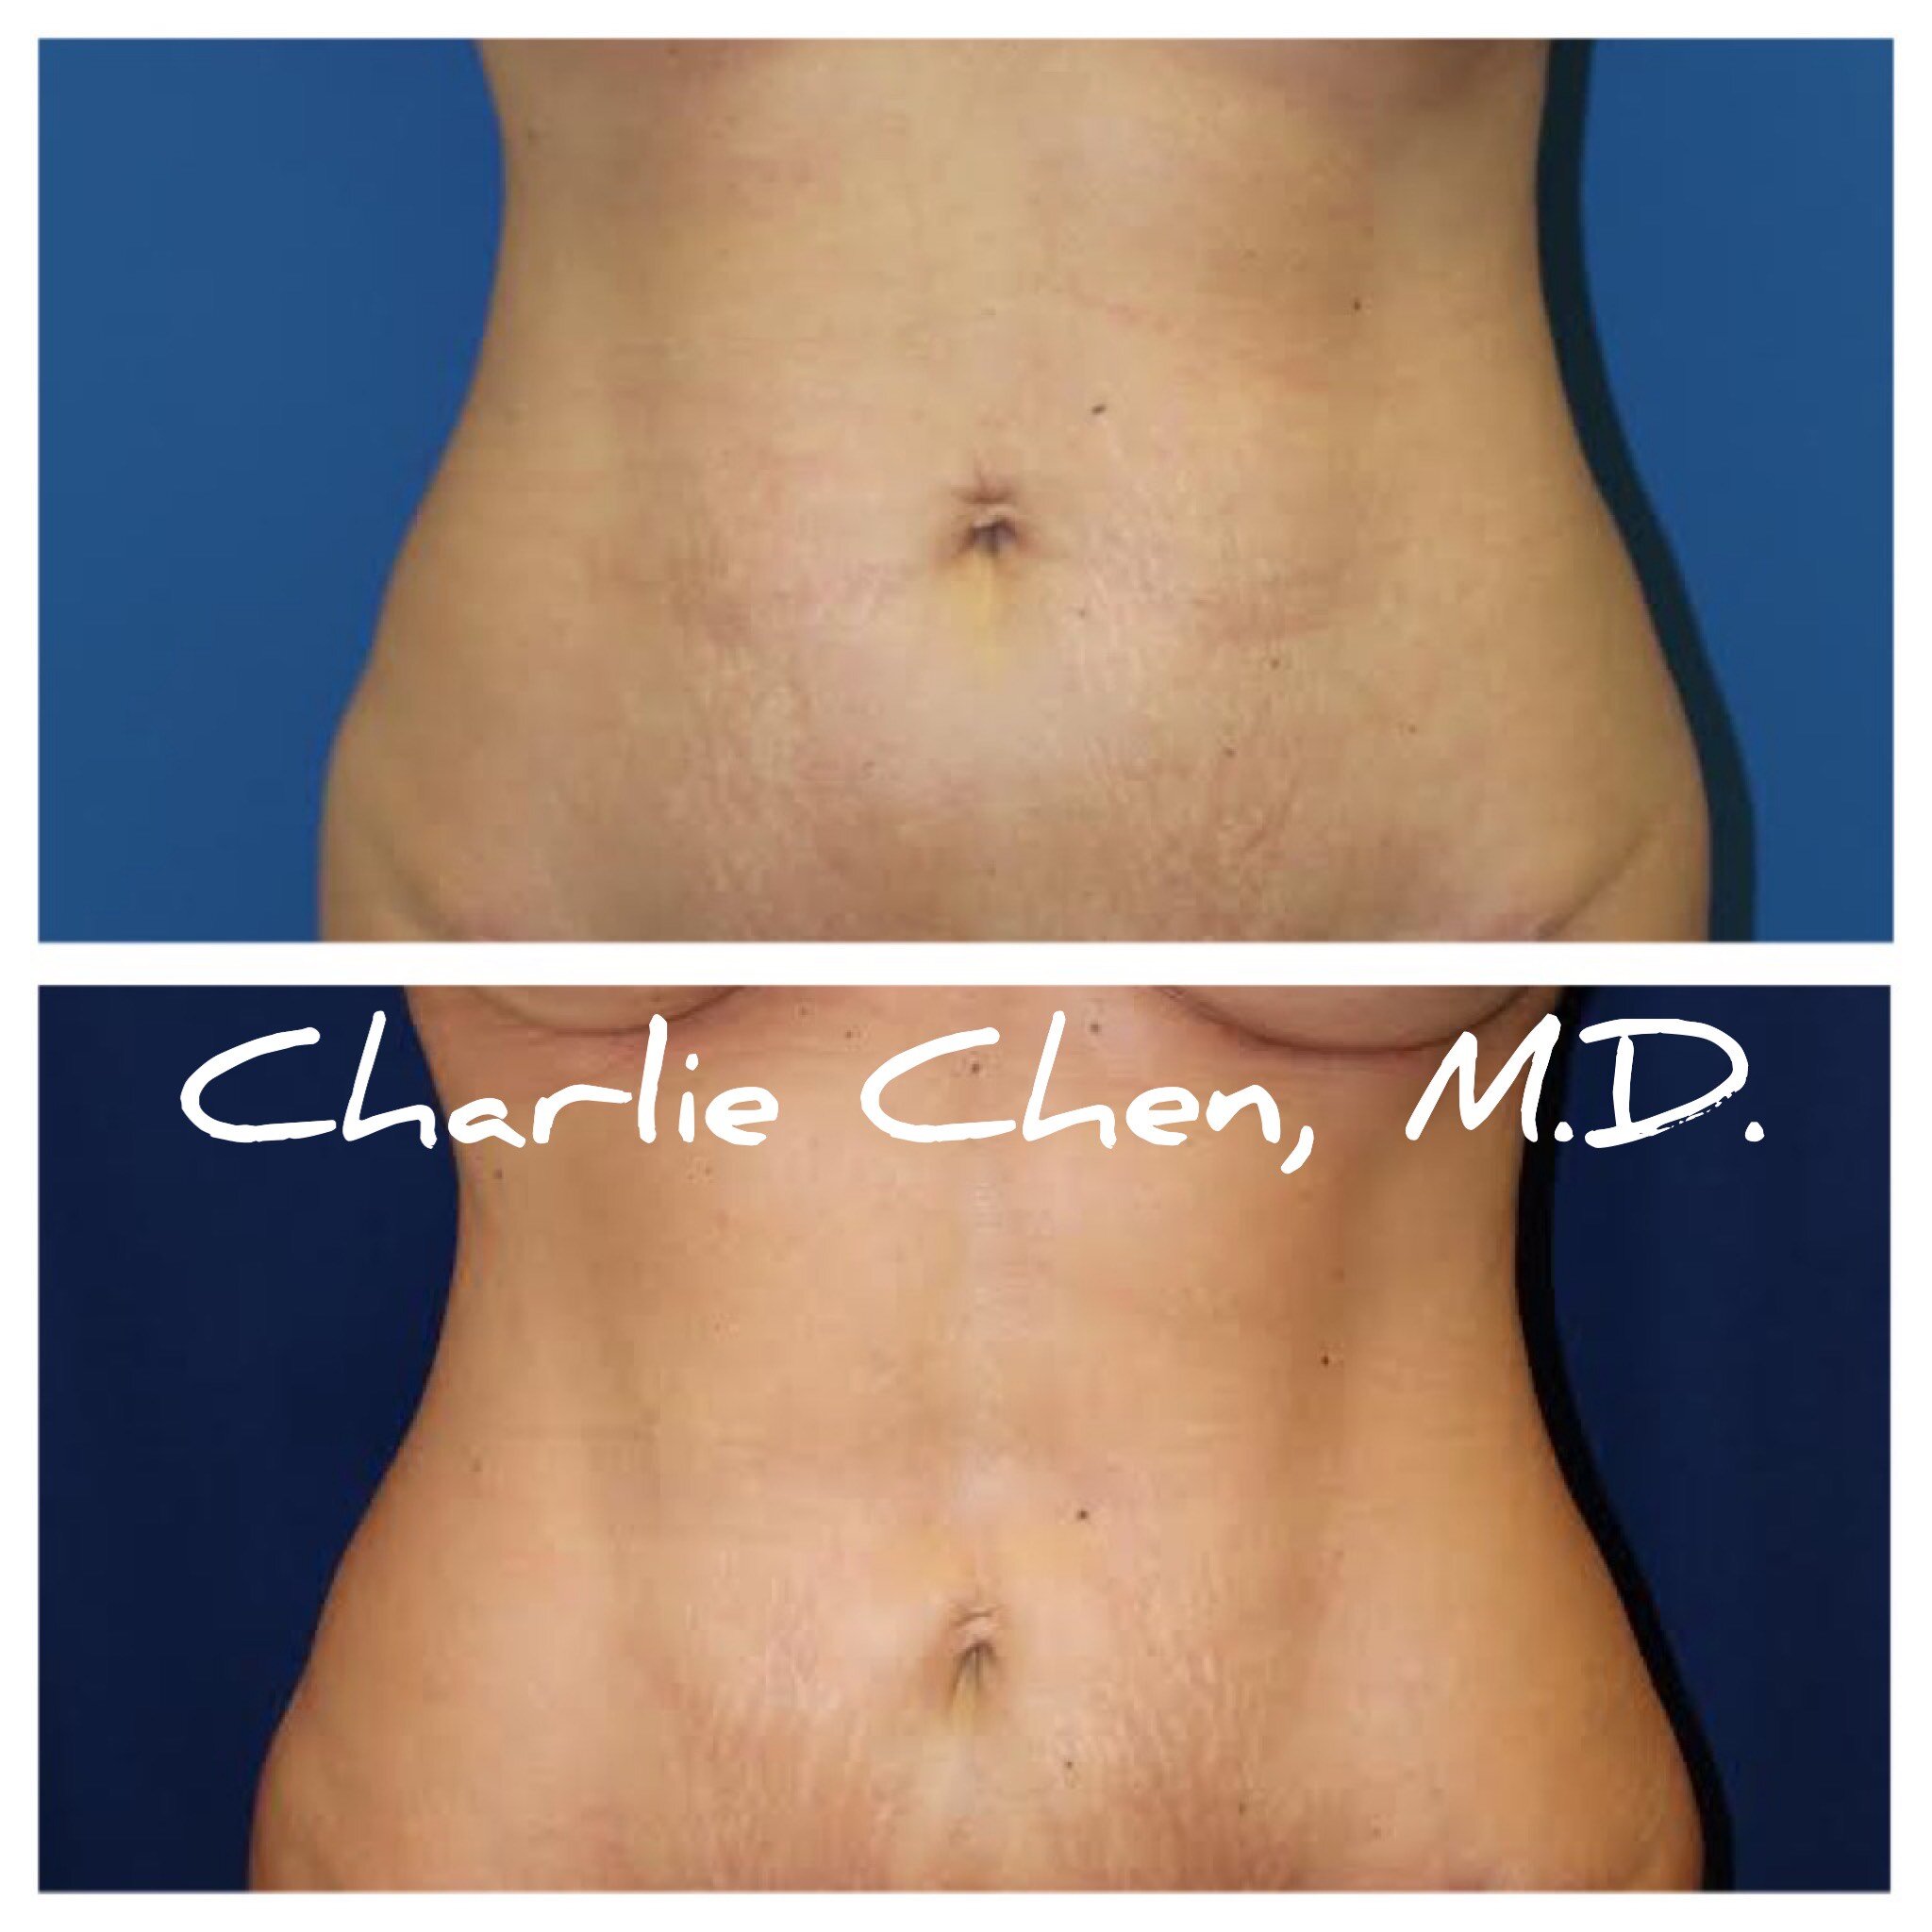 Abdominal Etching Before and After Photos, San Diego, CA - Charlie